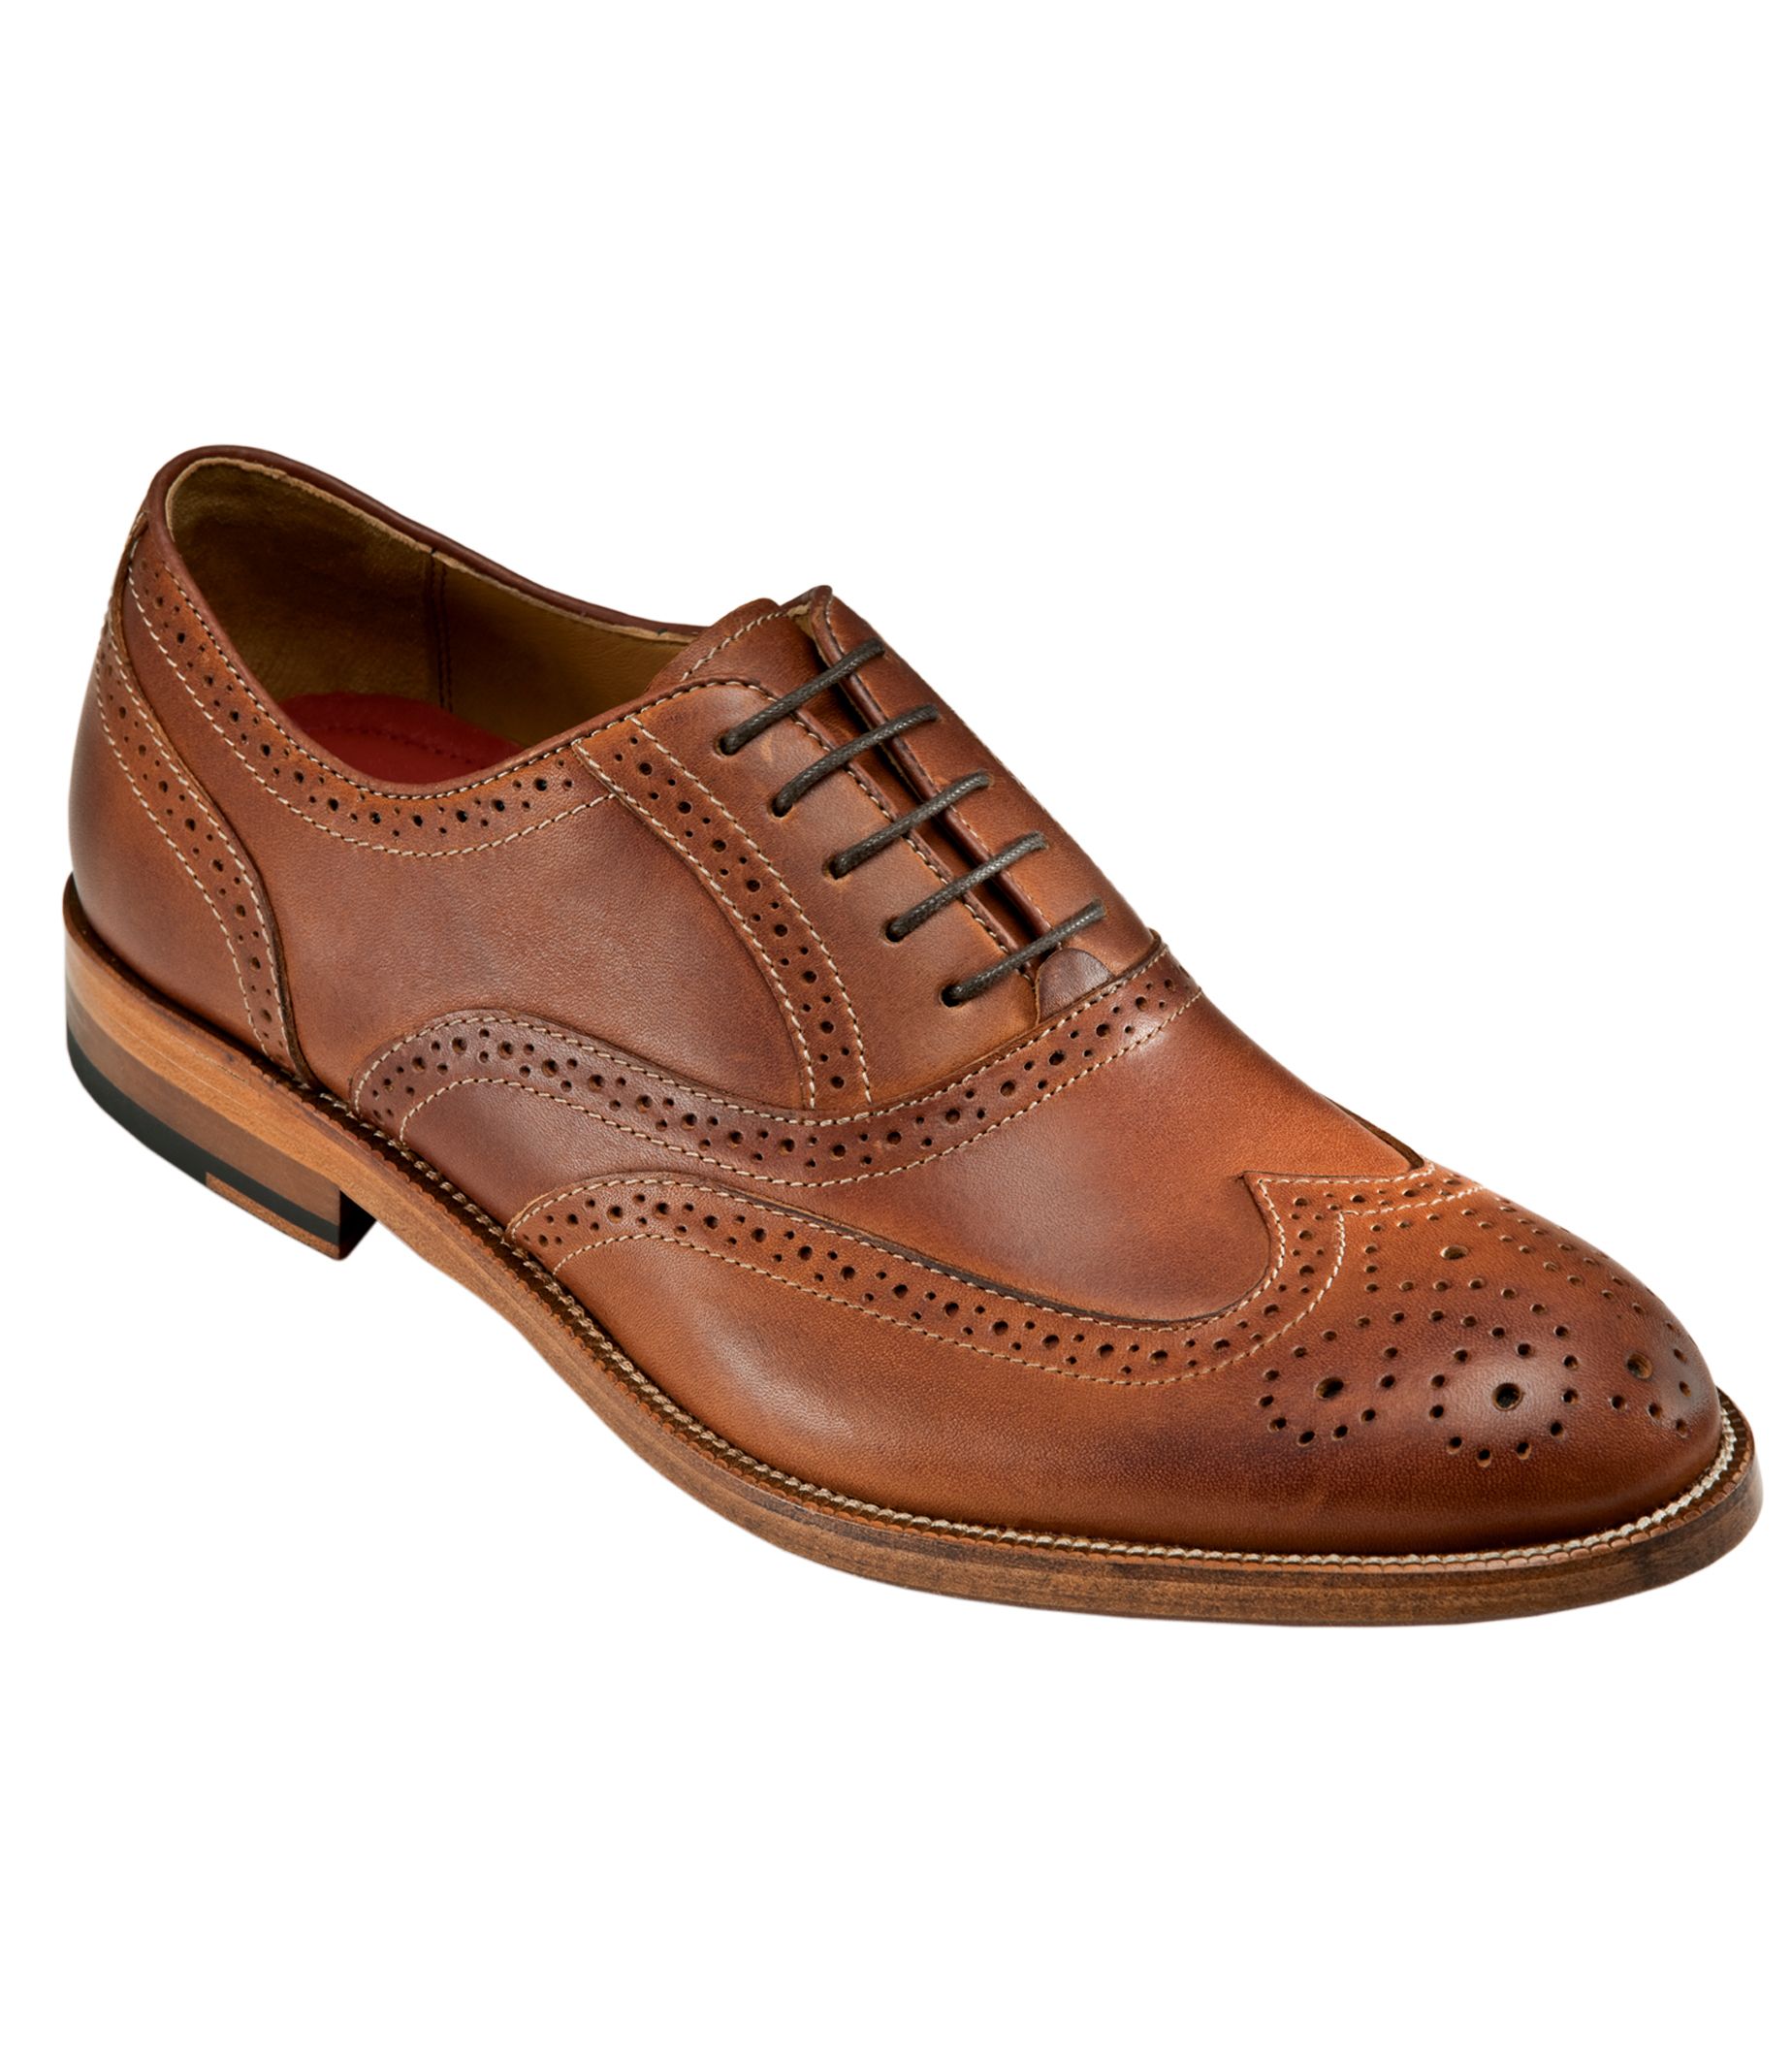 Clayton Medallion Wing Tip Shoe by Johnston and Murphy